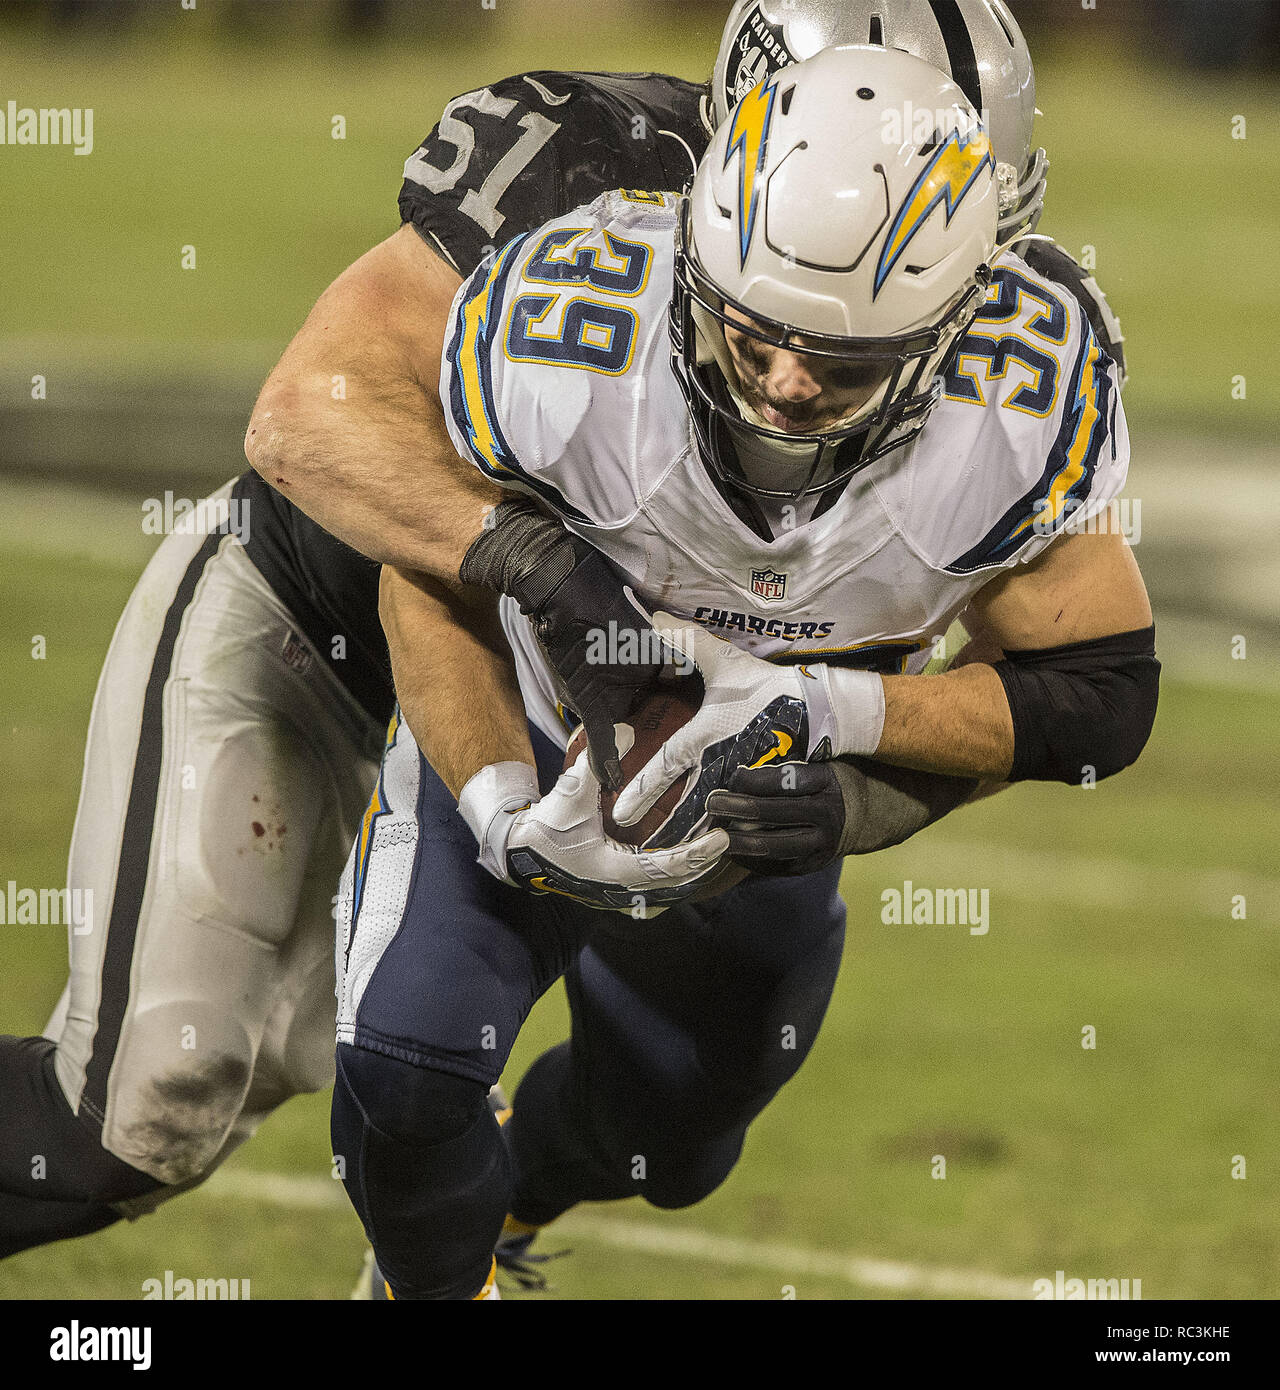 Oakland, California, USA. 24th Dec, 2015. Oakland Raiders inside linebacker Ben Heeney (51) tackles San Diego Chargers running back Danny Woodhead (39) on Sunday, December 24, 2015, at O.co Coliseum in Oakland, California. The Raiders defeated the Chargers 23-20. Credit: Al Golub/ZUMA Wire/Alamy Live News Stock Photo